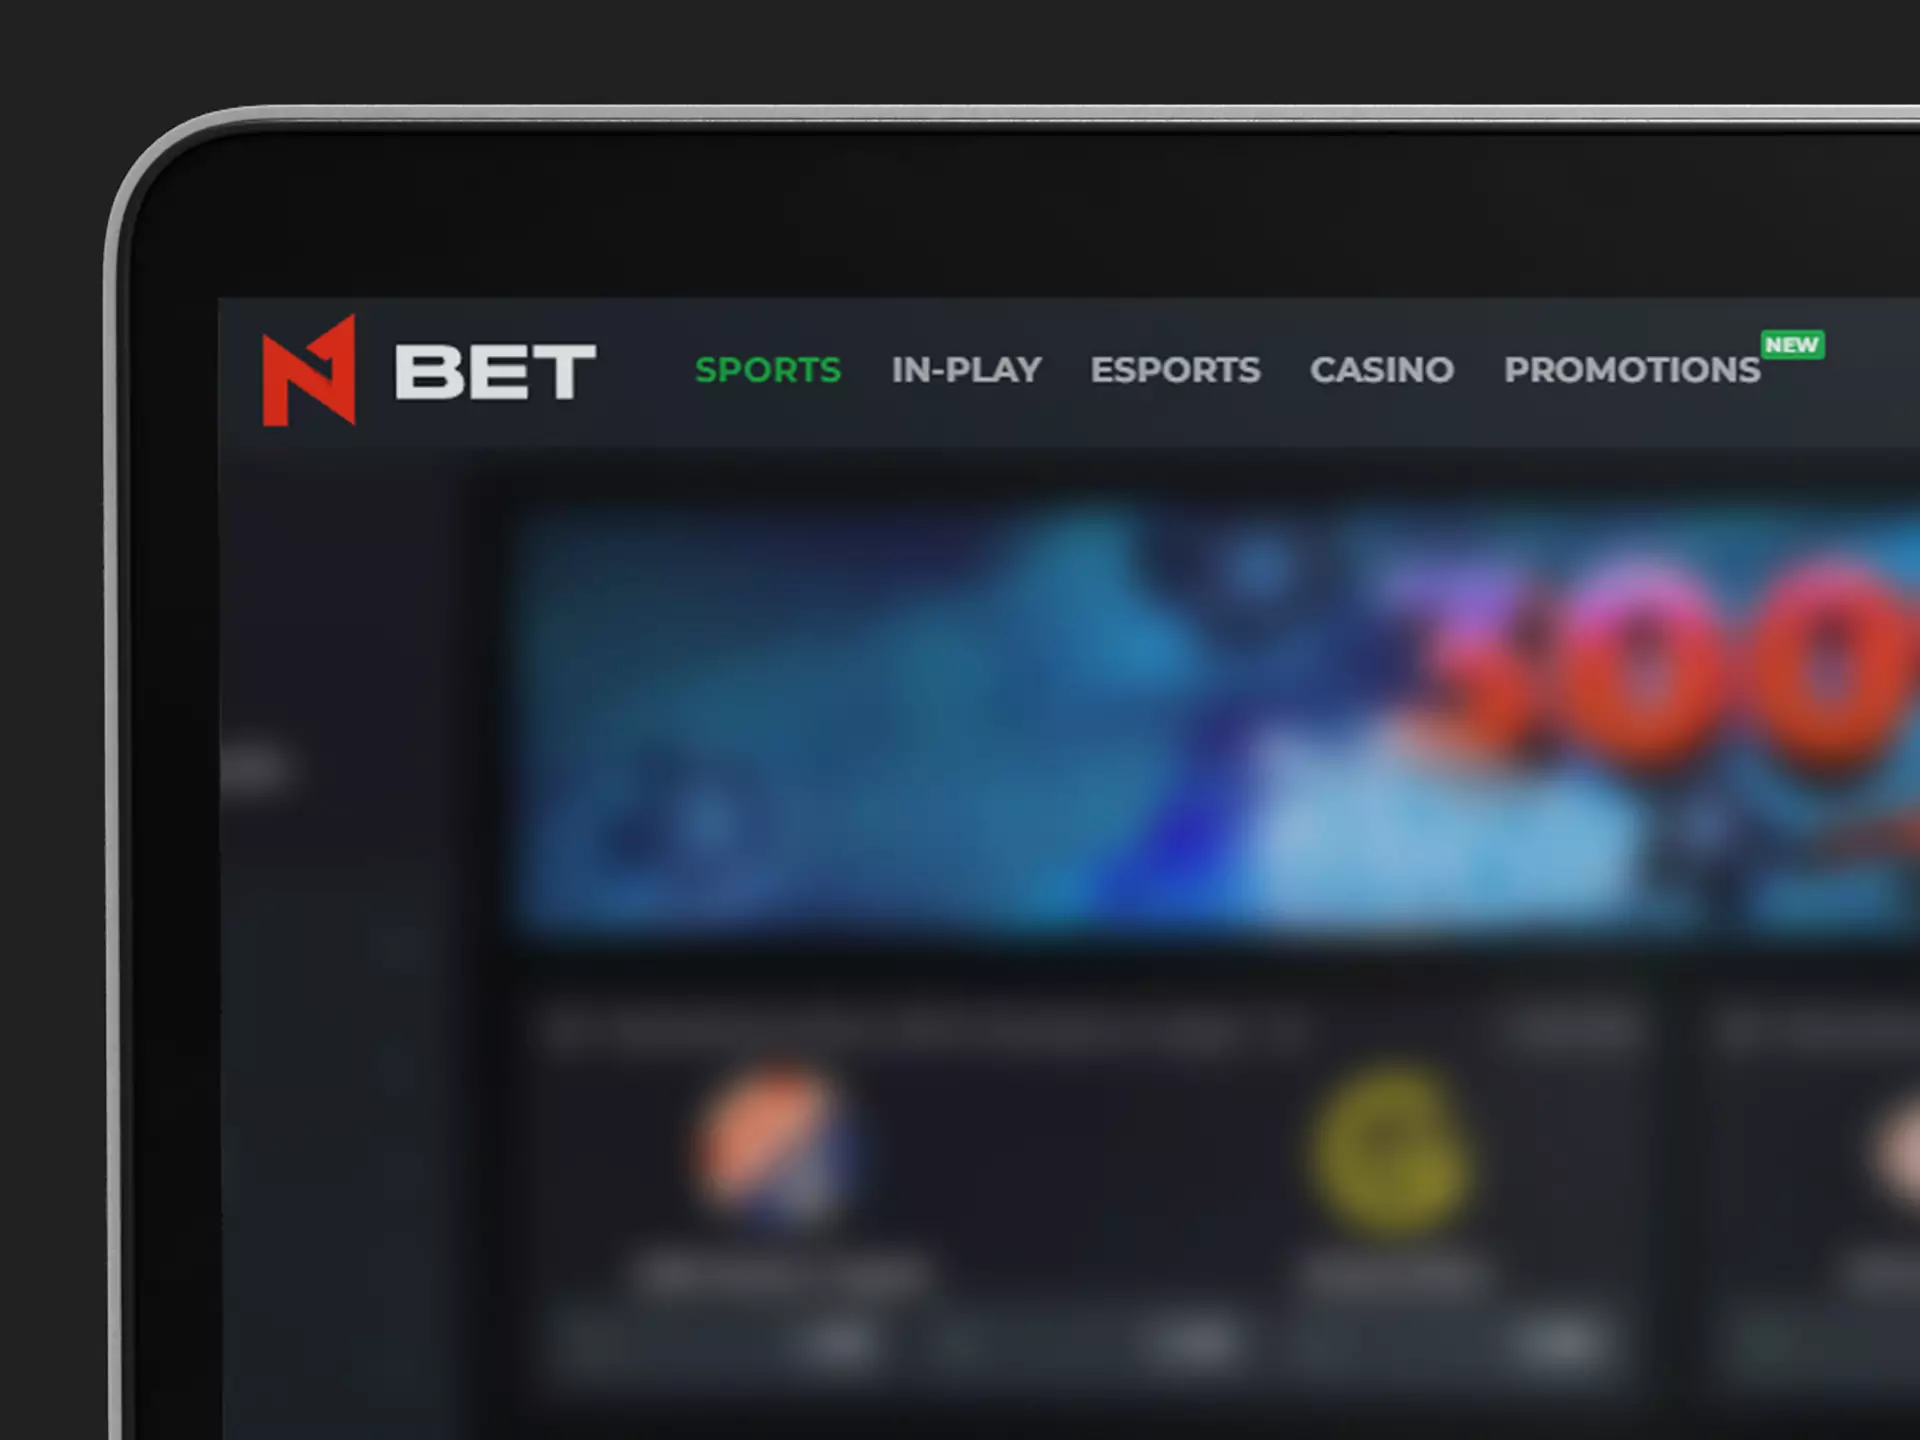 Enter main pages of N1Bet website.